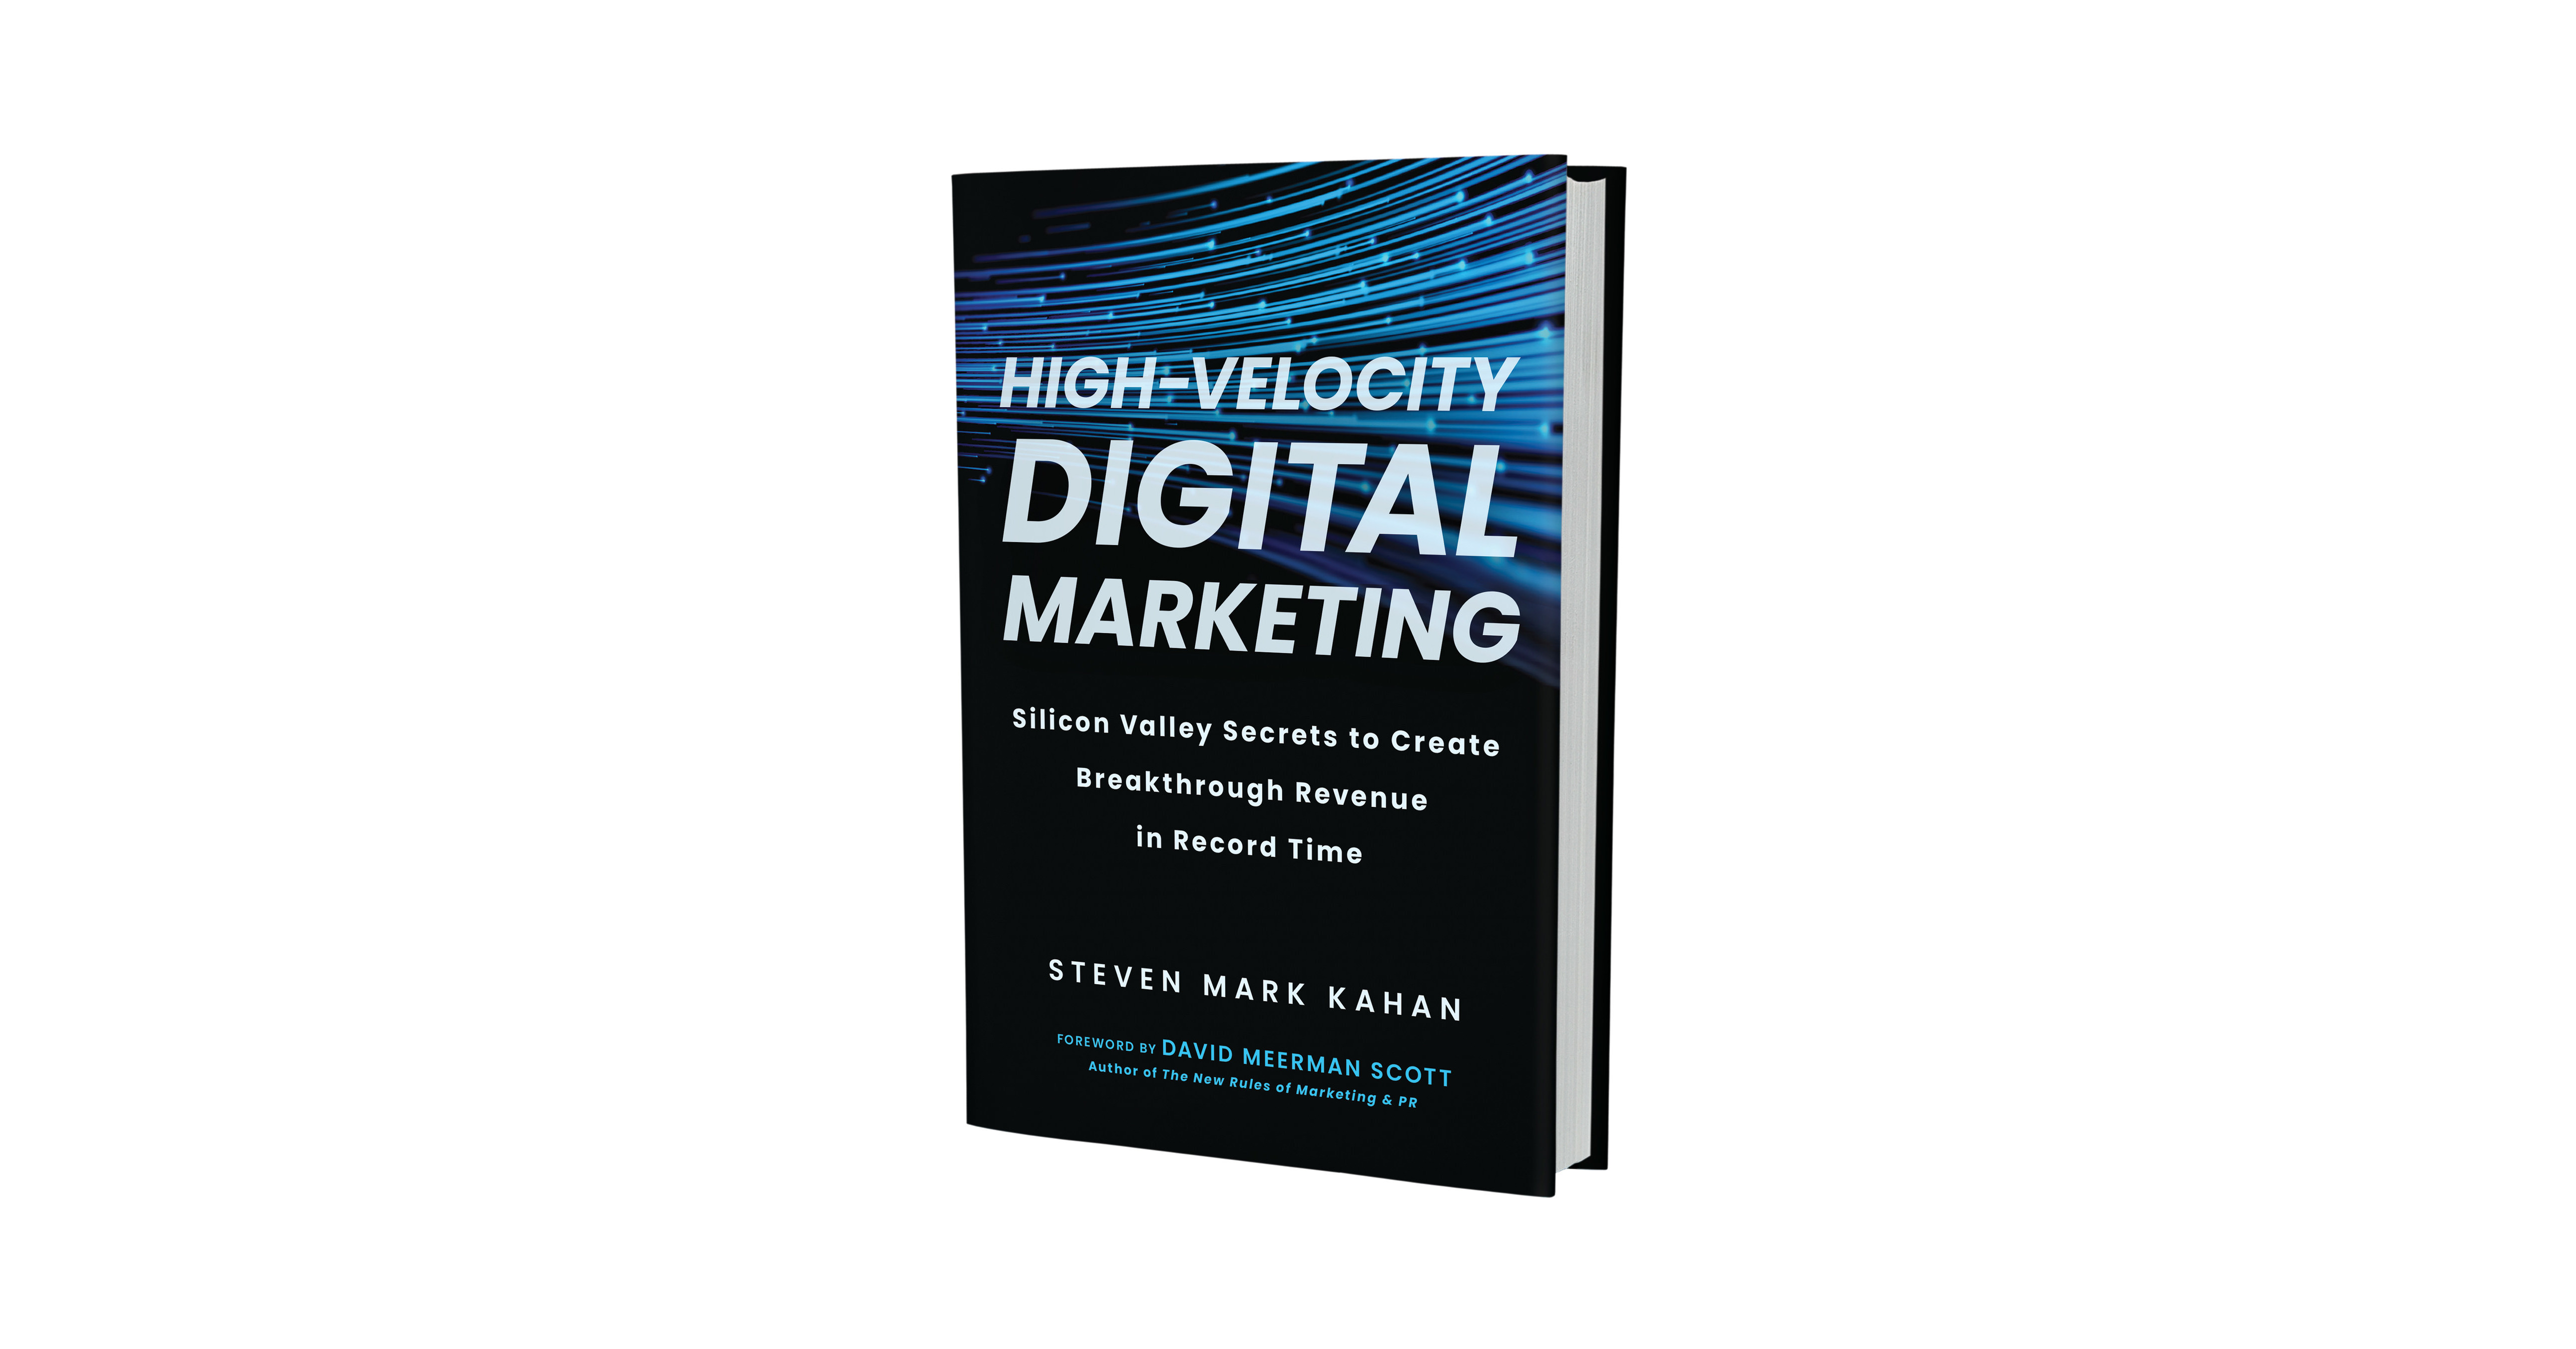 BenBella Books to release High-Velocity Digital Marketing: Silicon Valley  Secrets to Create Breakthrough Revenue in Record Time by Steven Mark Kahan